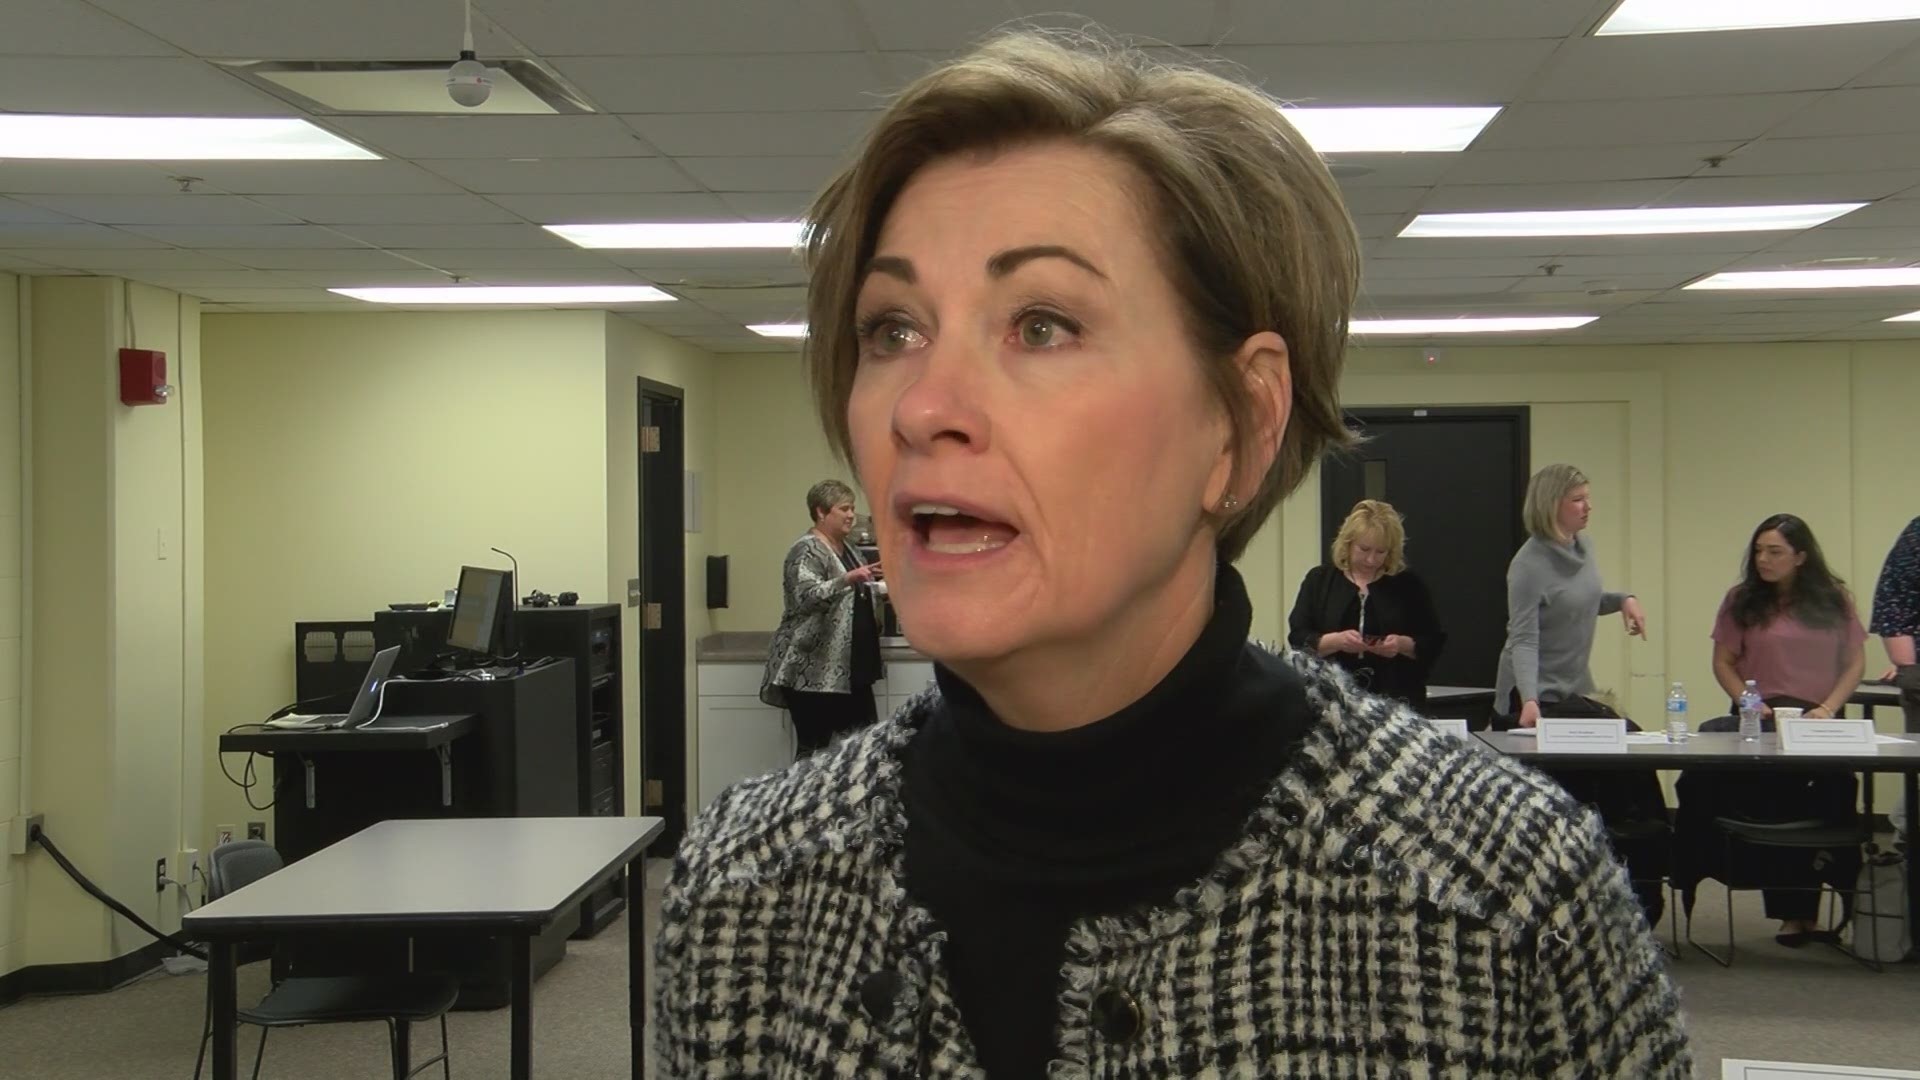 Gov. Kim Reynolds tells Local 5 that health officials have been meeting every day to discuss preparedness for the disease as numbers continue to rise worldwide